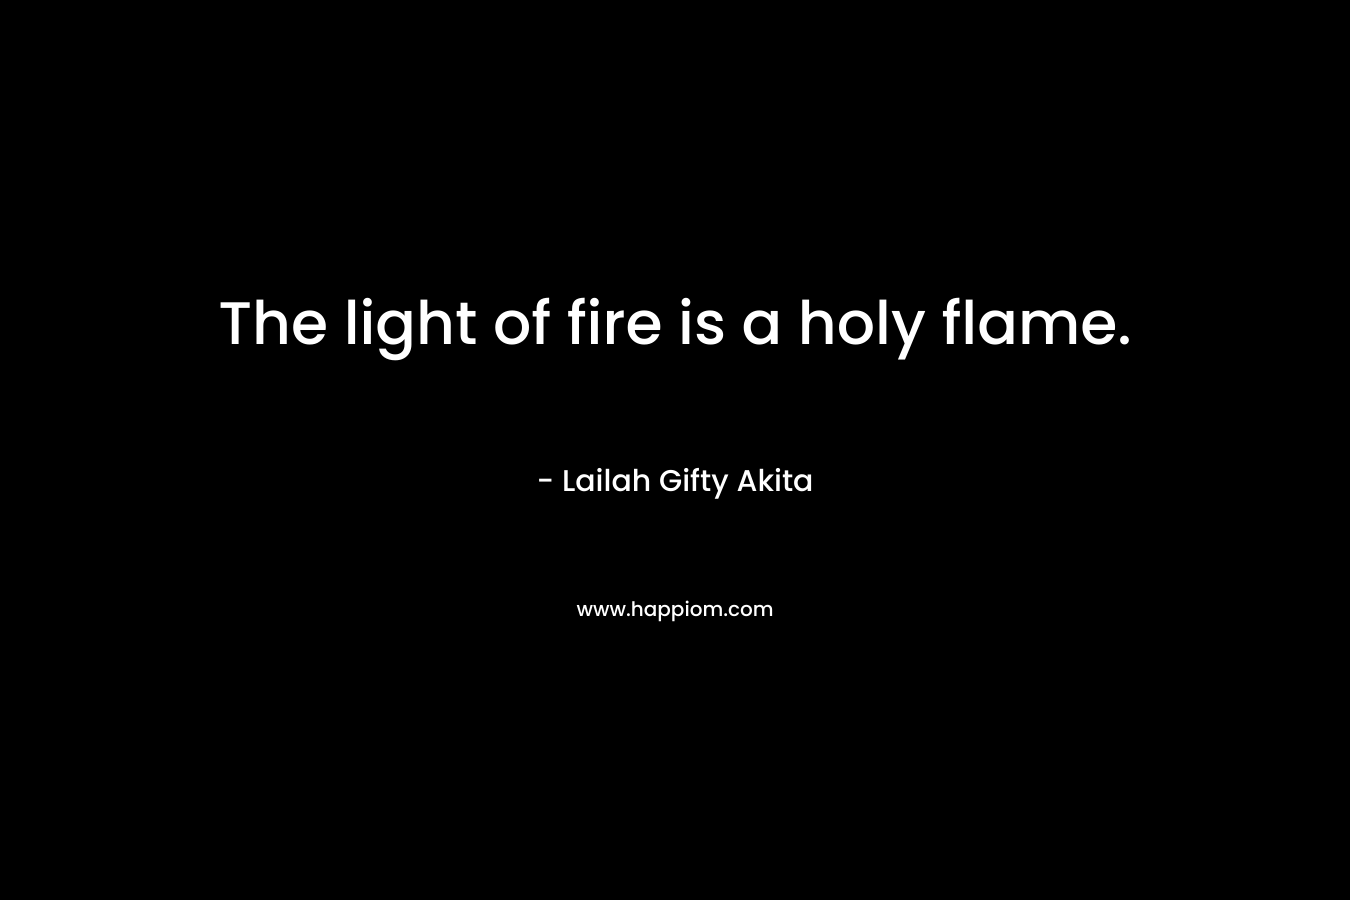 The light of fire is a holy flame.